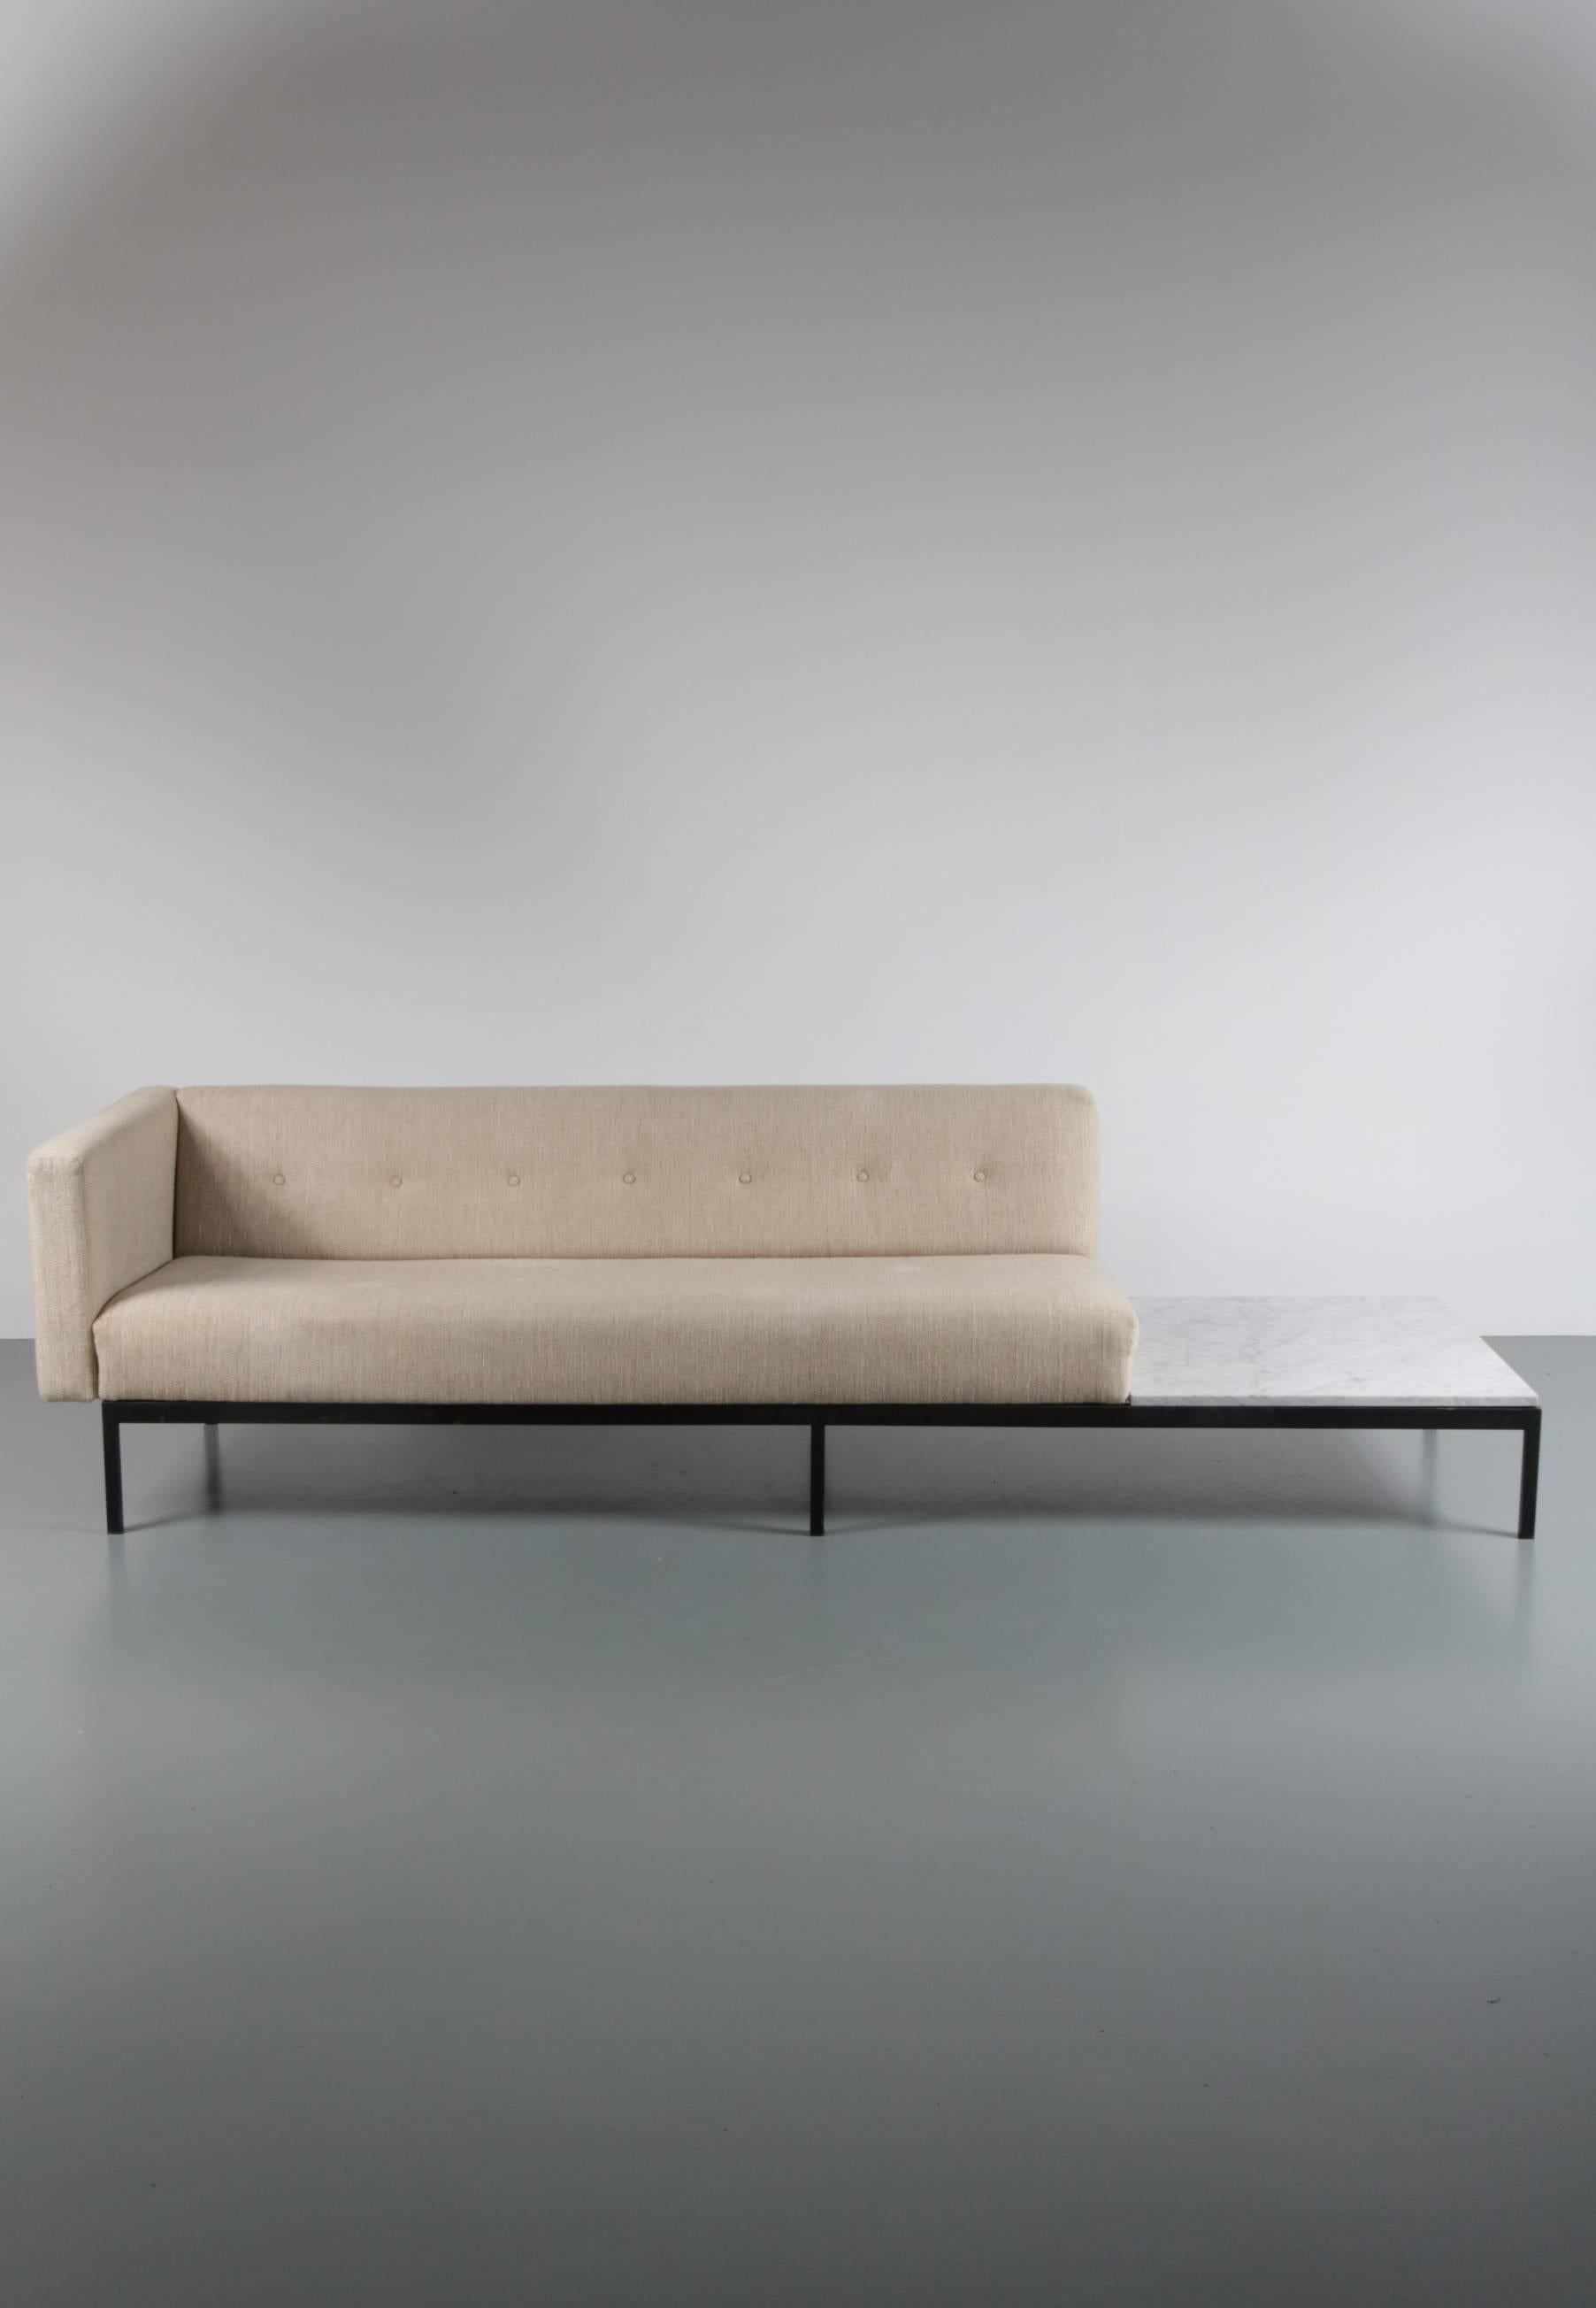 Amazing sofa with integrated coffee table designed by Kho Liang Ie, manufactured by Artifort in the Netherlands, circa 1960.

This eye-catching piece has a high quality square black metal base. The sofa part has a beautiful cream / beige colored